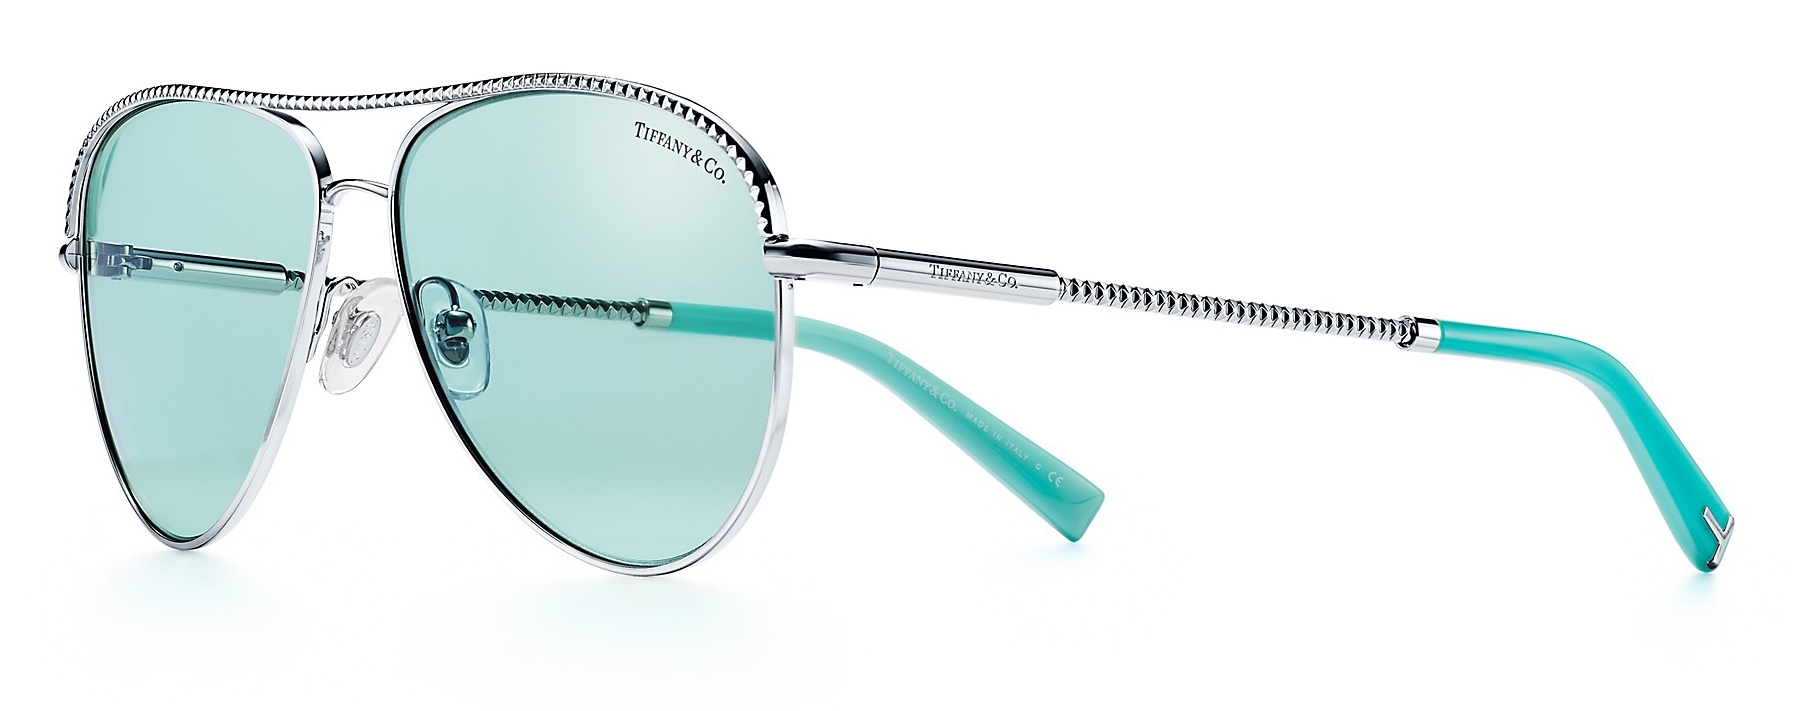 Wheat Leaf Sunglasses in Black Acetate with Gradient Tiffany Blue® Lenses |  Tiffany & Co.